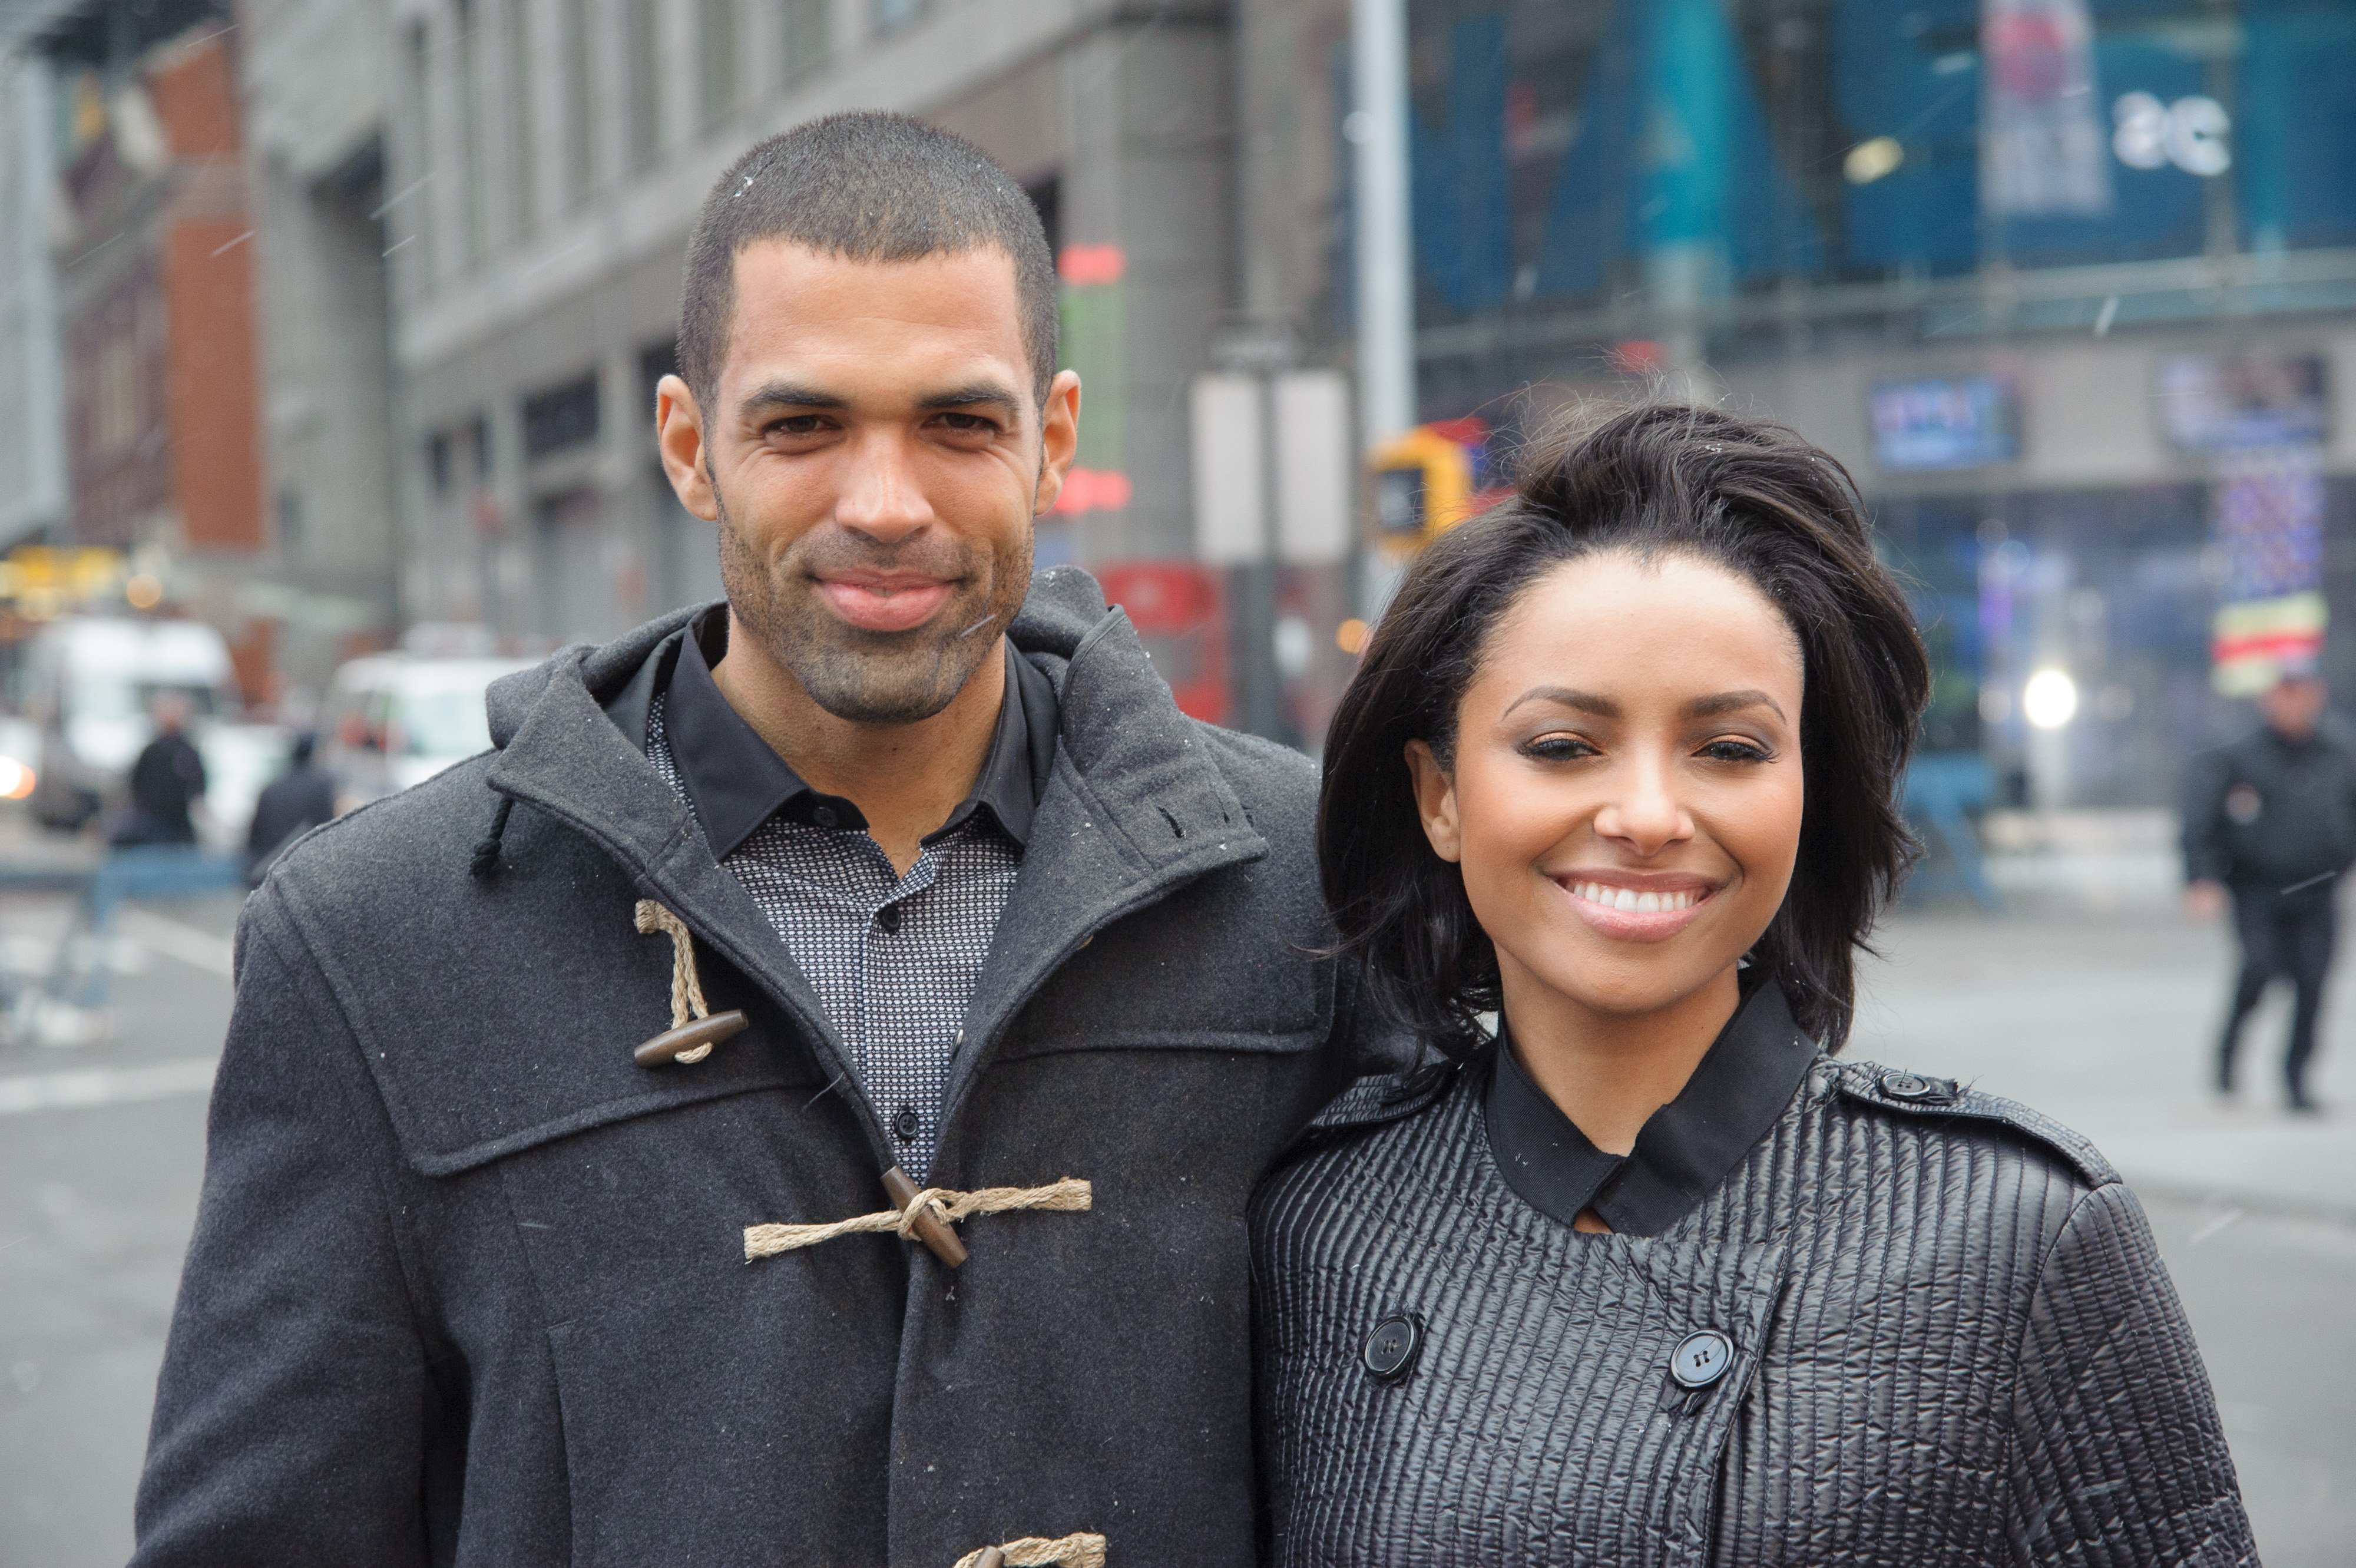 Kat Graham and Cottrell Guidry at the NASDAQ MarketSite on December 31, 2013, in New York City. | Source: Getty Images